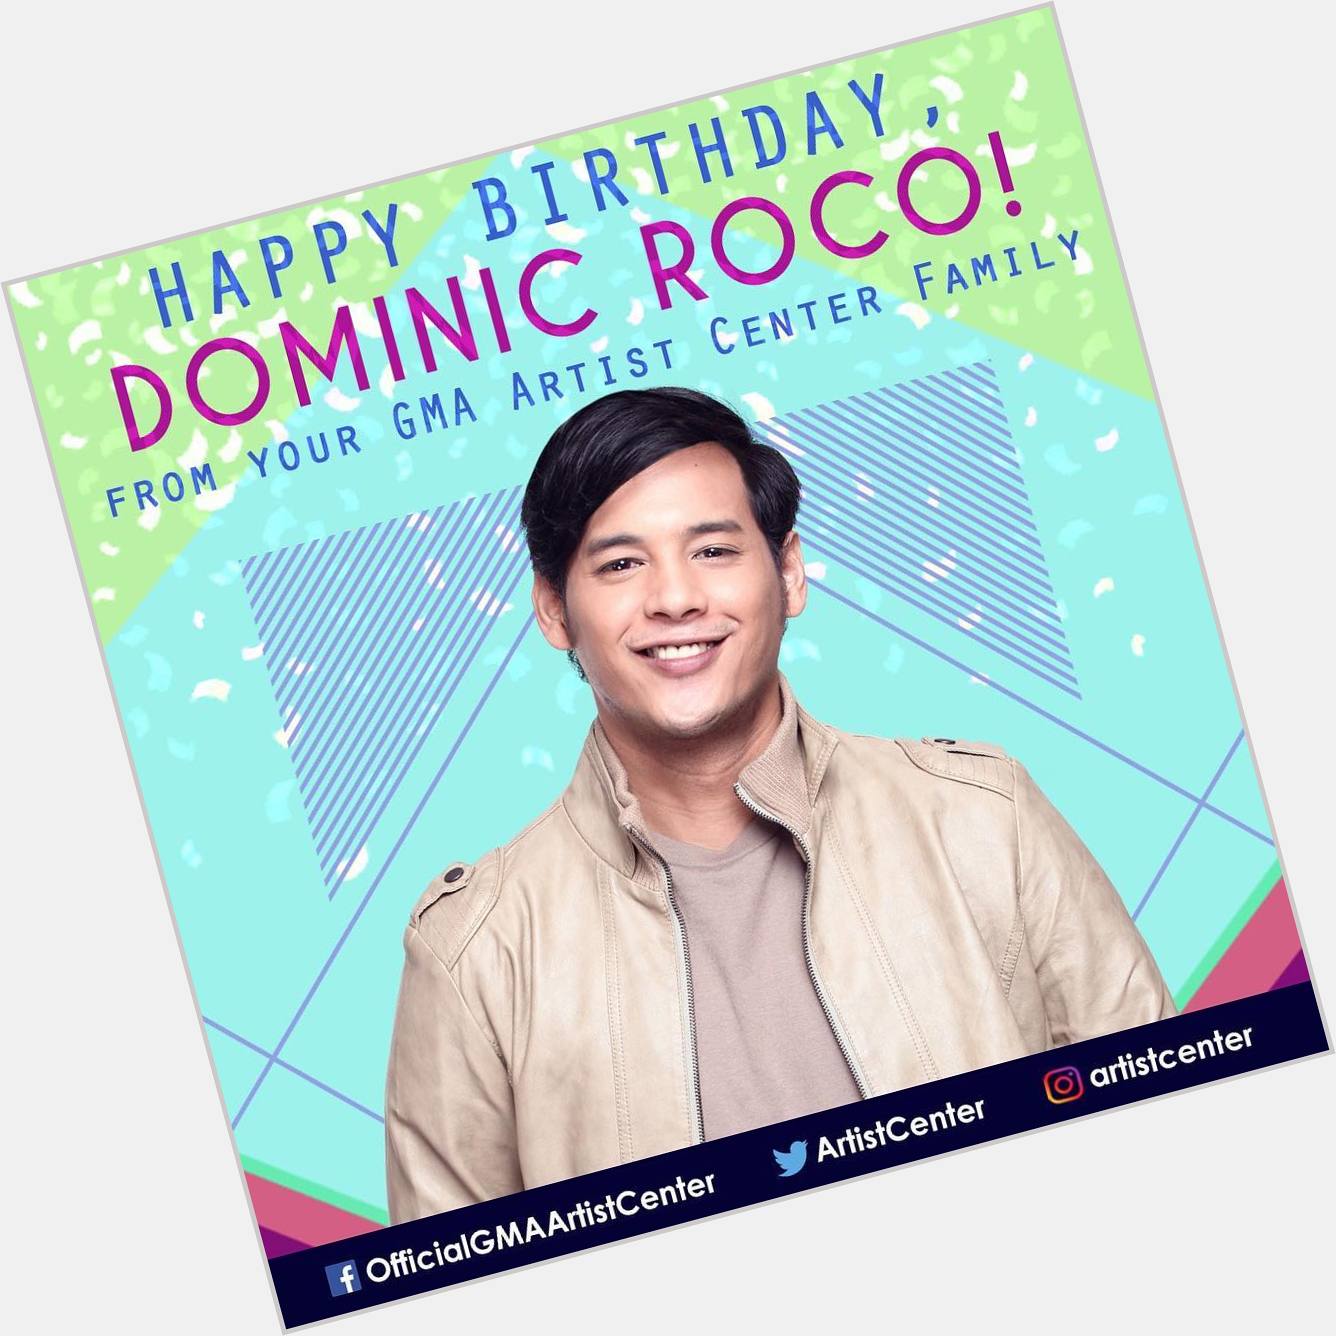 Happy Birthday, Dominic Roco! We hope all your birthday wishes come true!   